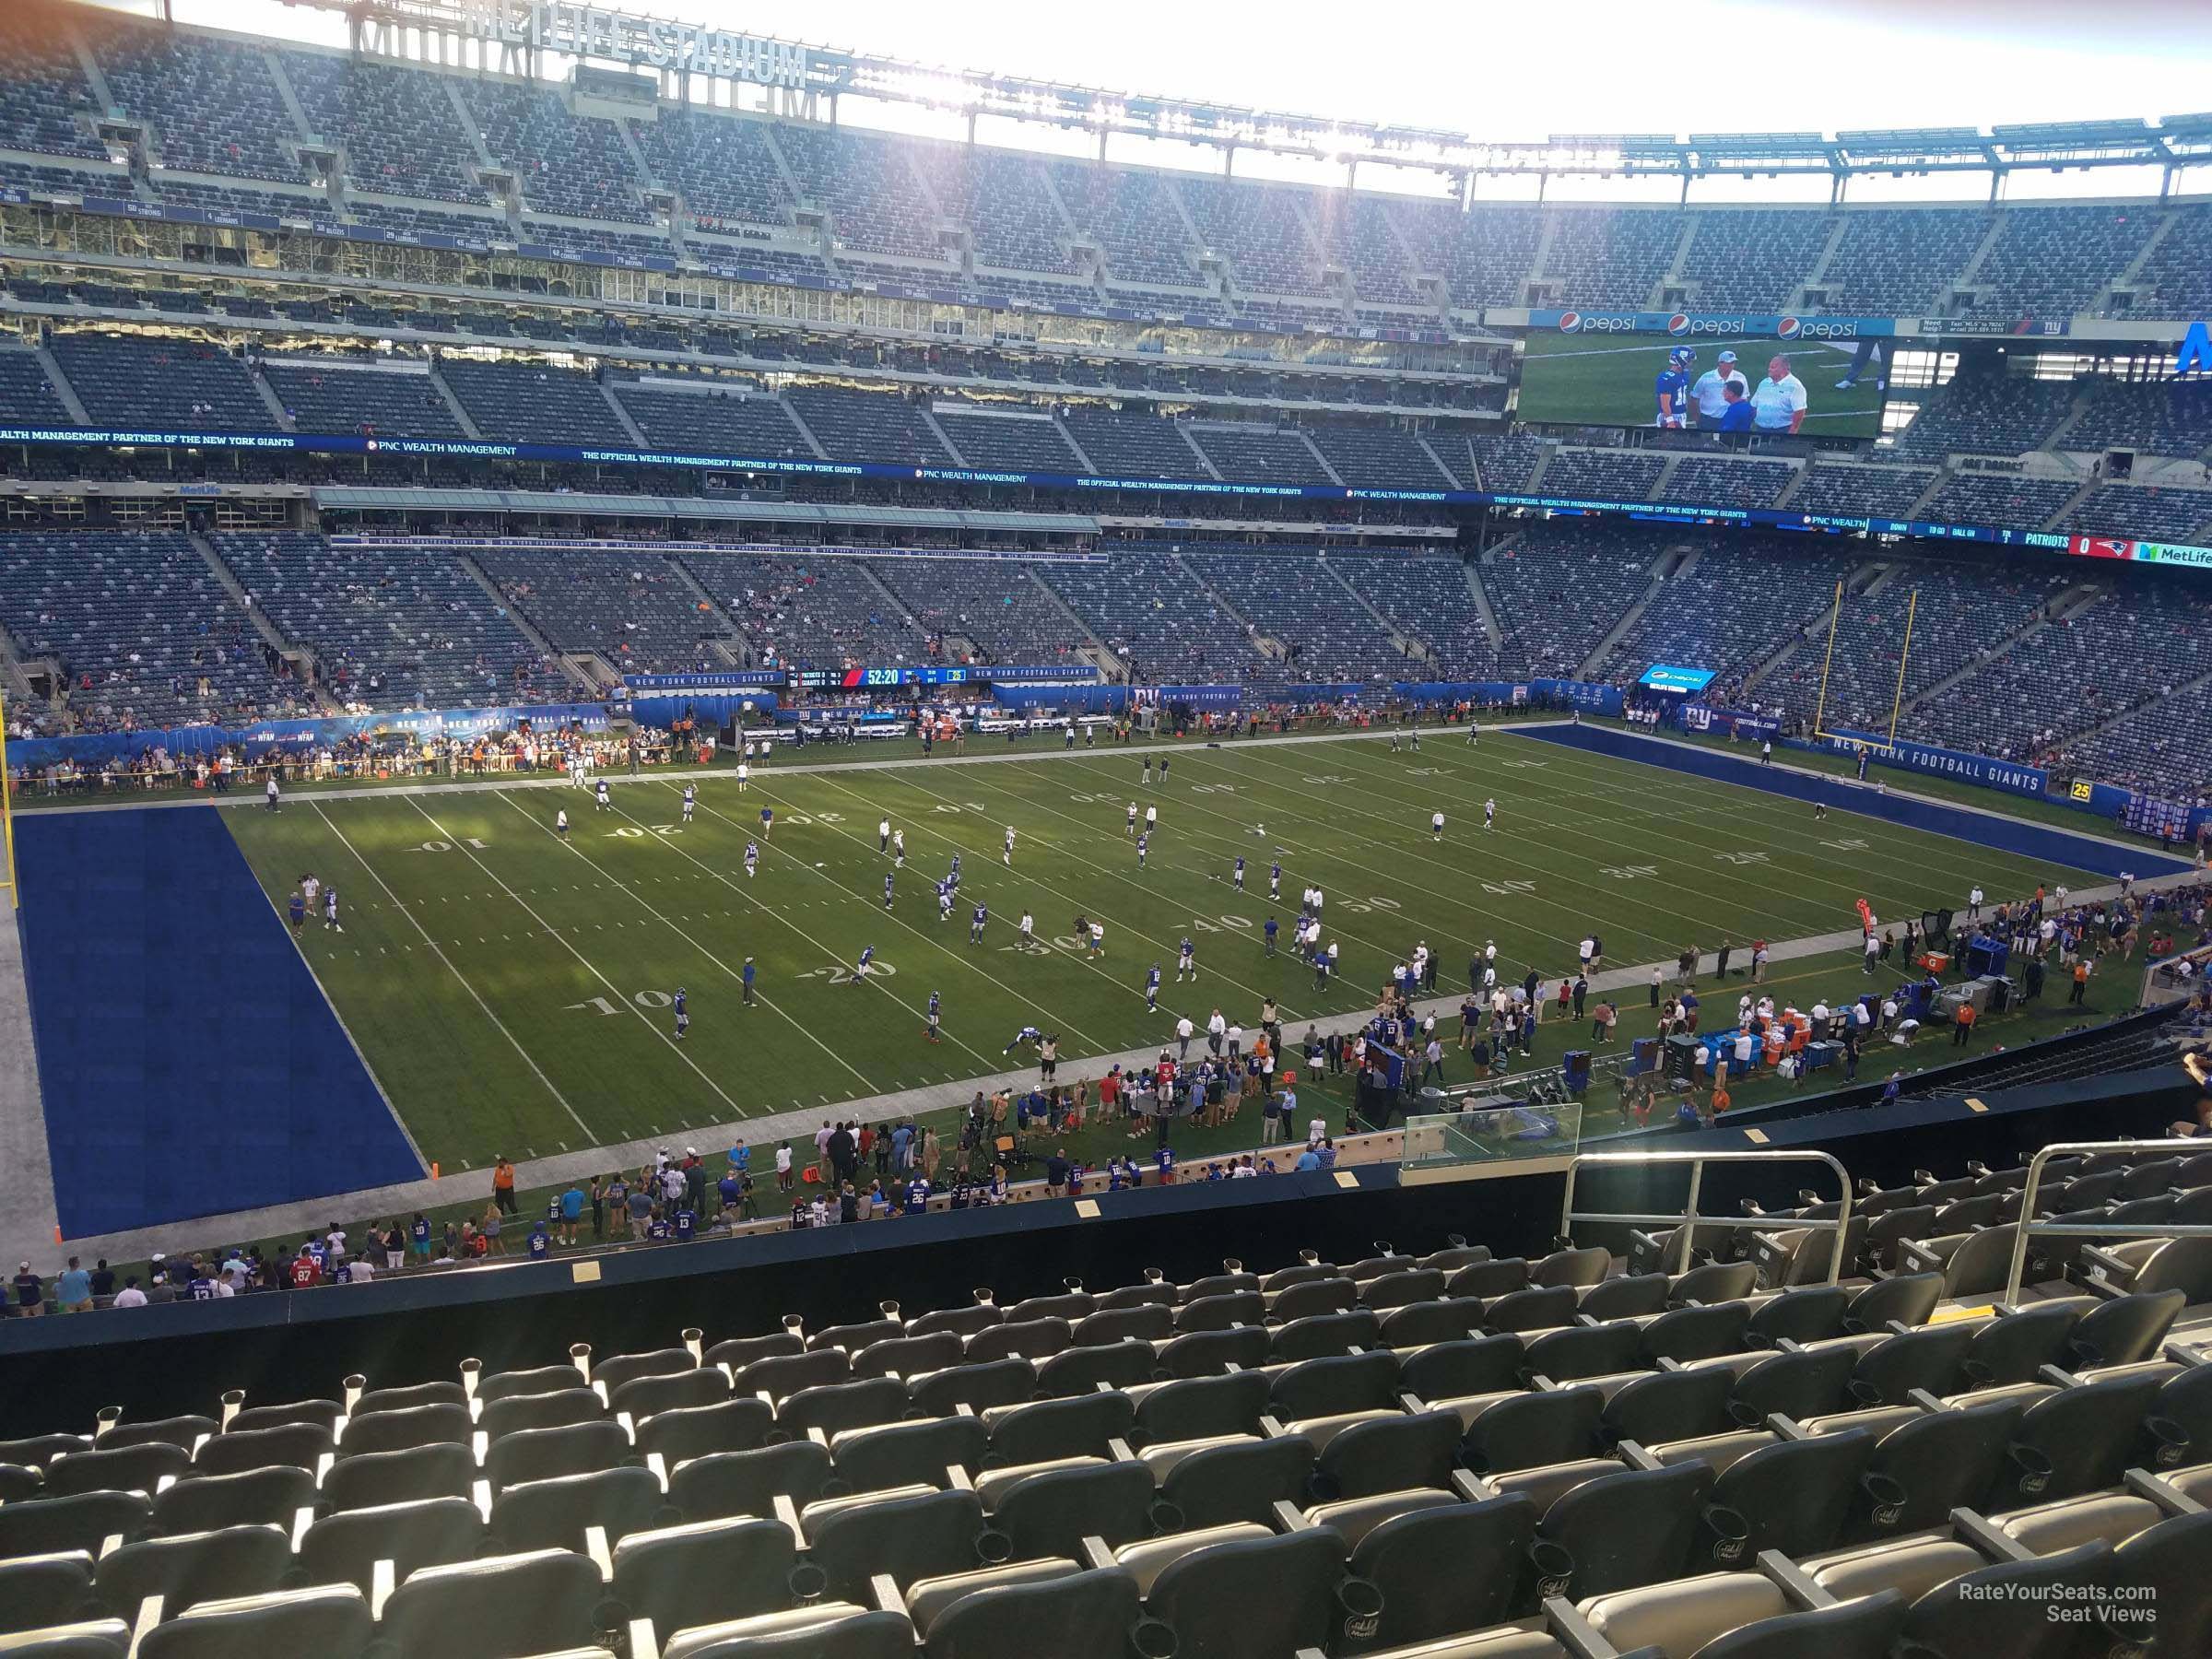 section 218, row 10 seat view  for football - metlife stadium